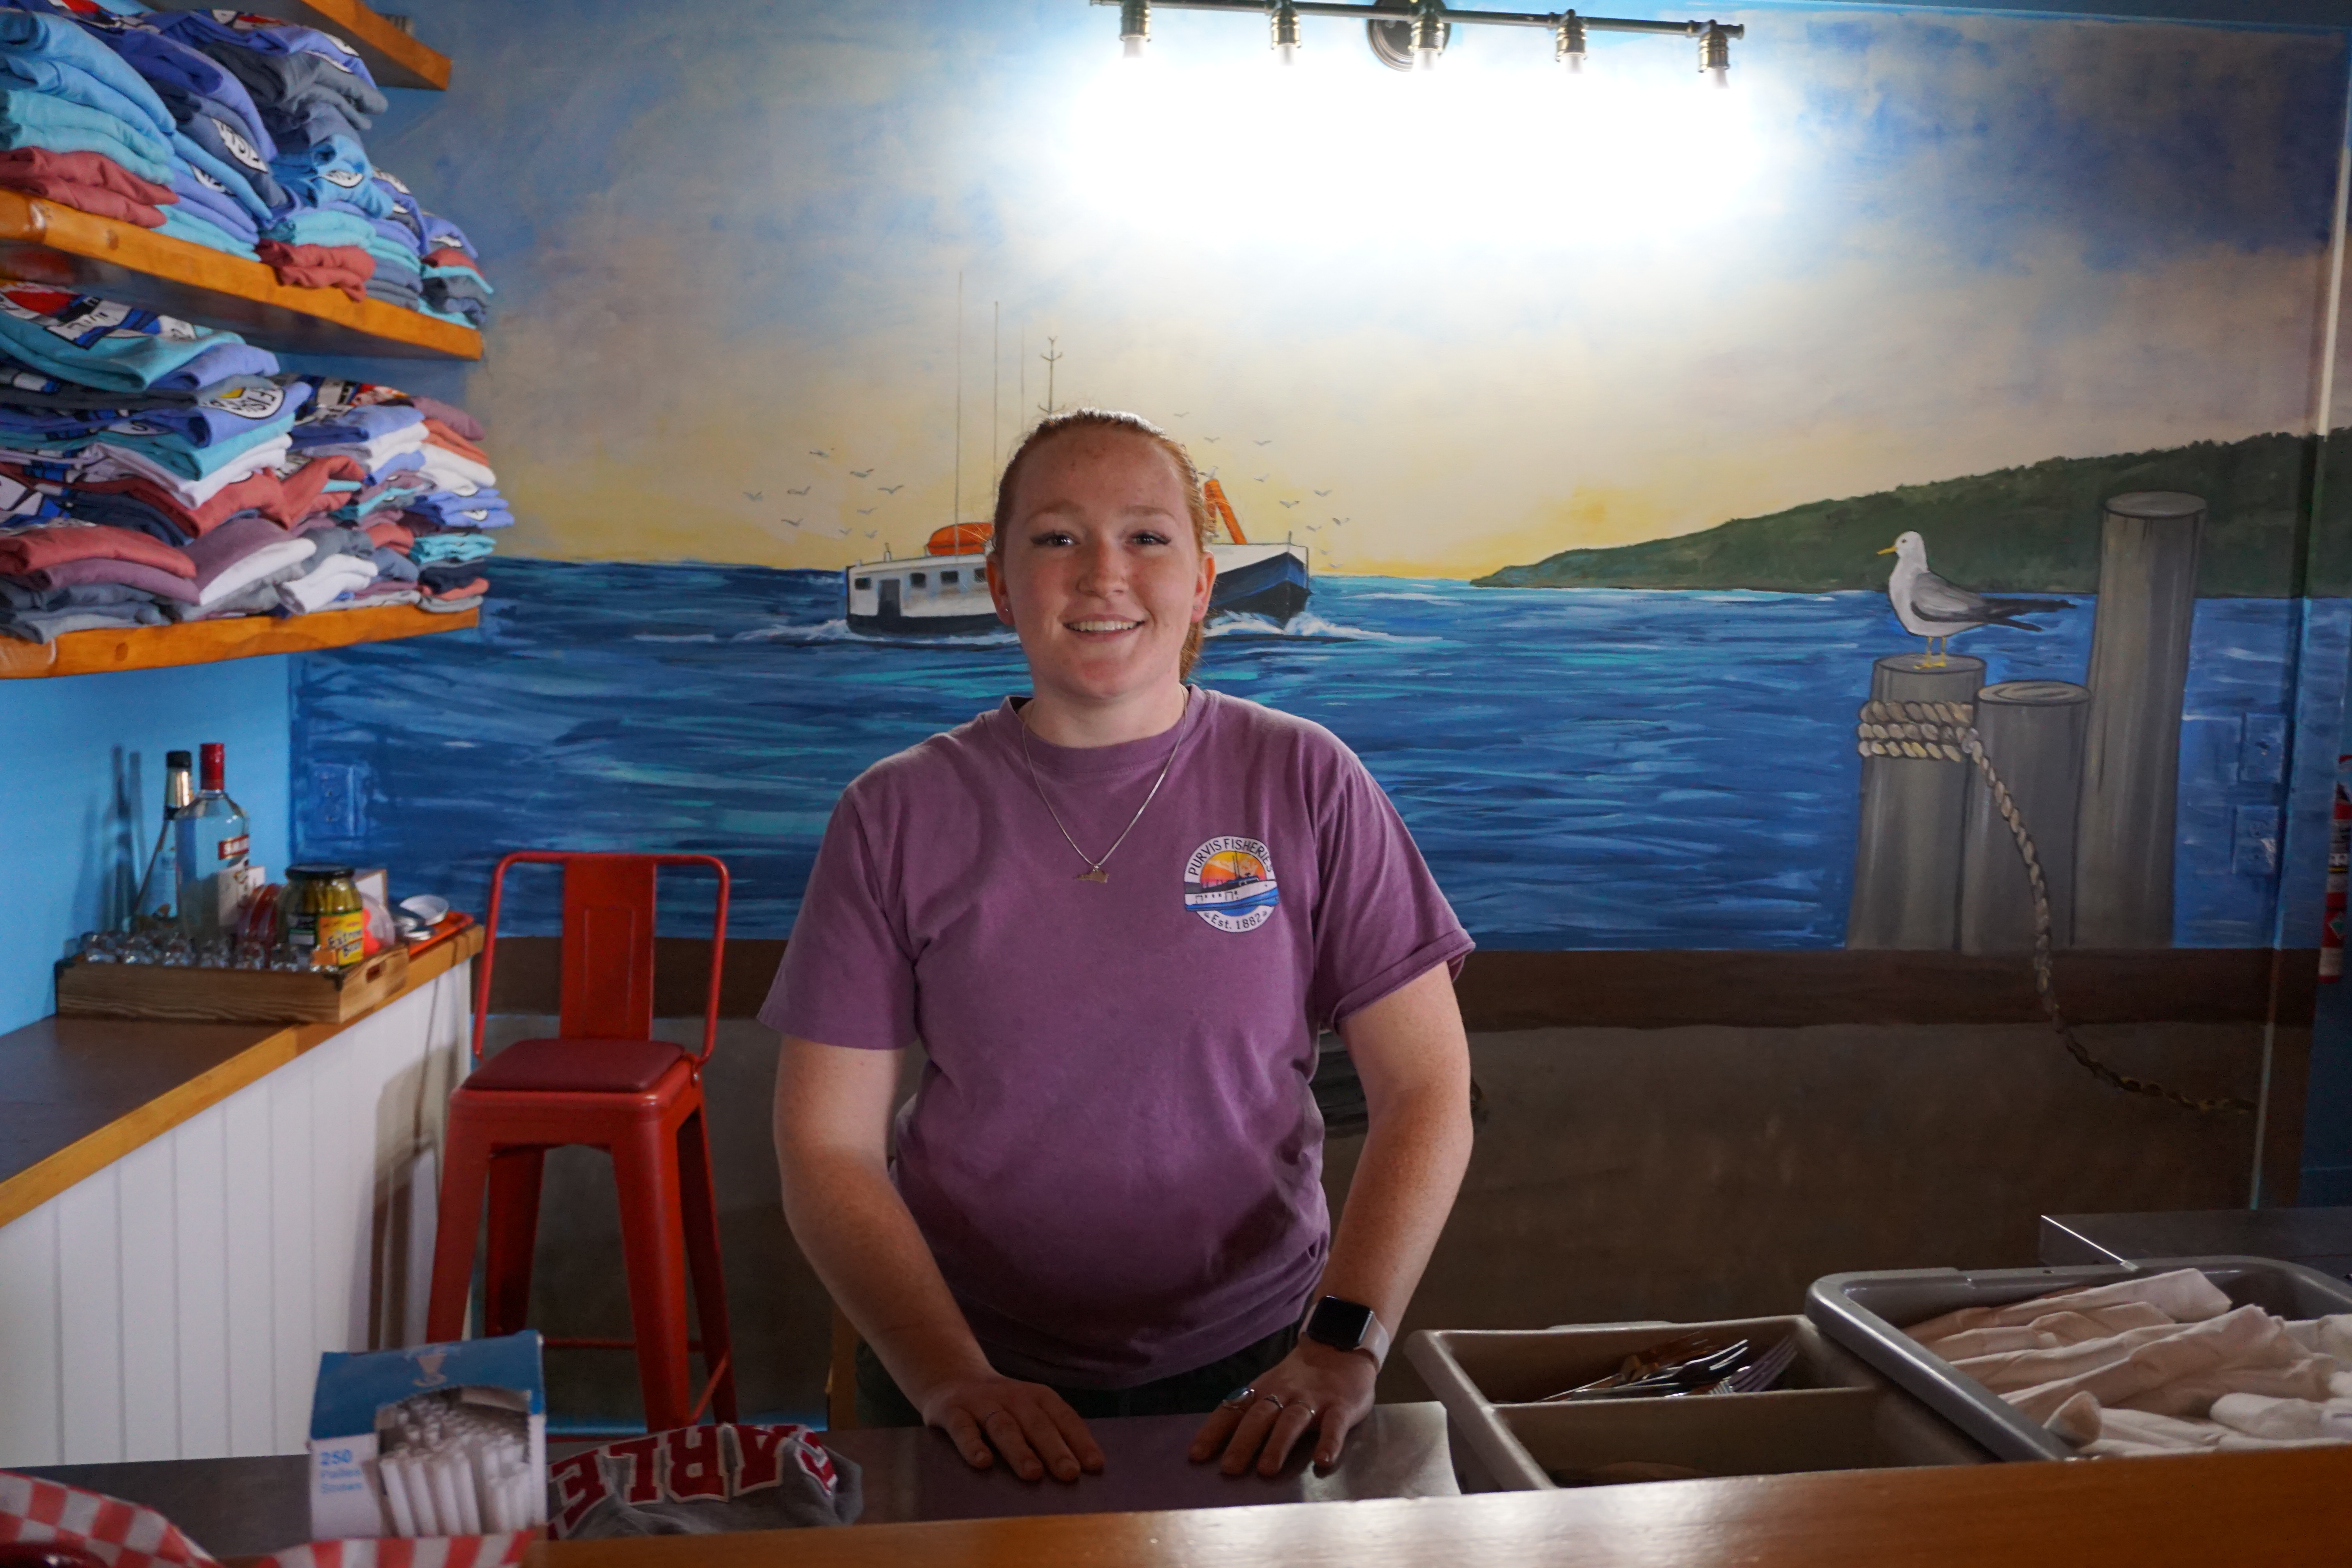 Owner Avery Sheppard smiling behind the counter of Purvis Fish & Chips, a mural of a blue harbour and fishing boat on the wall behind her.